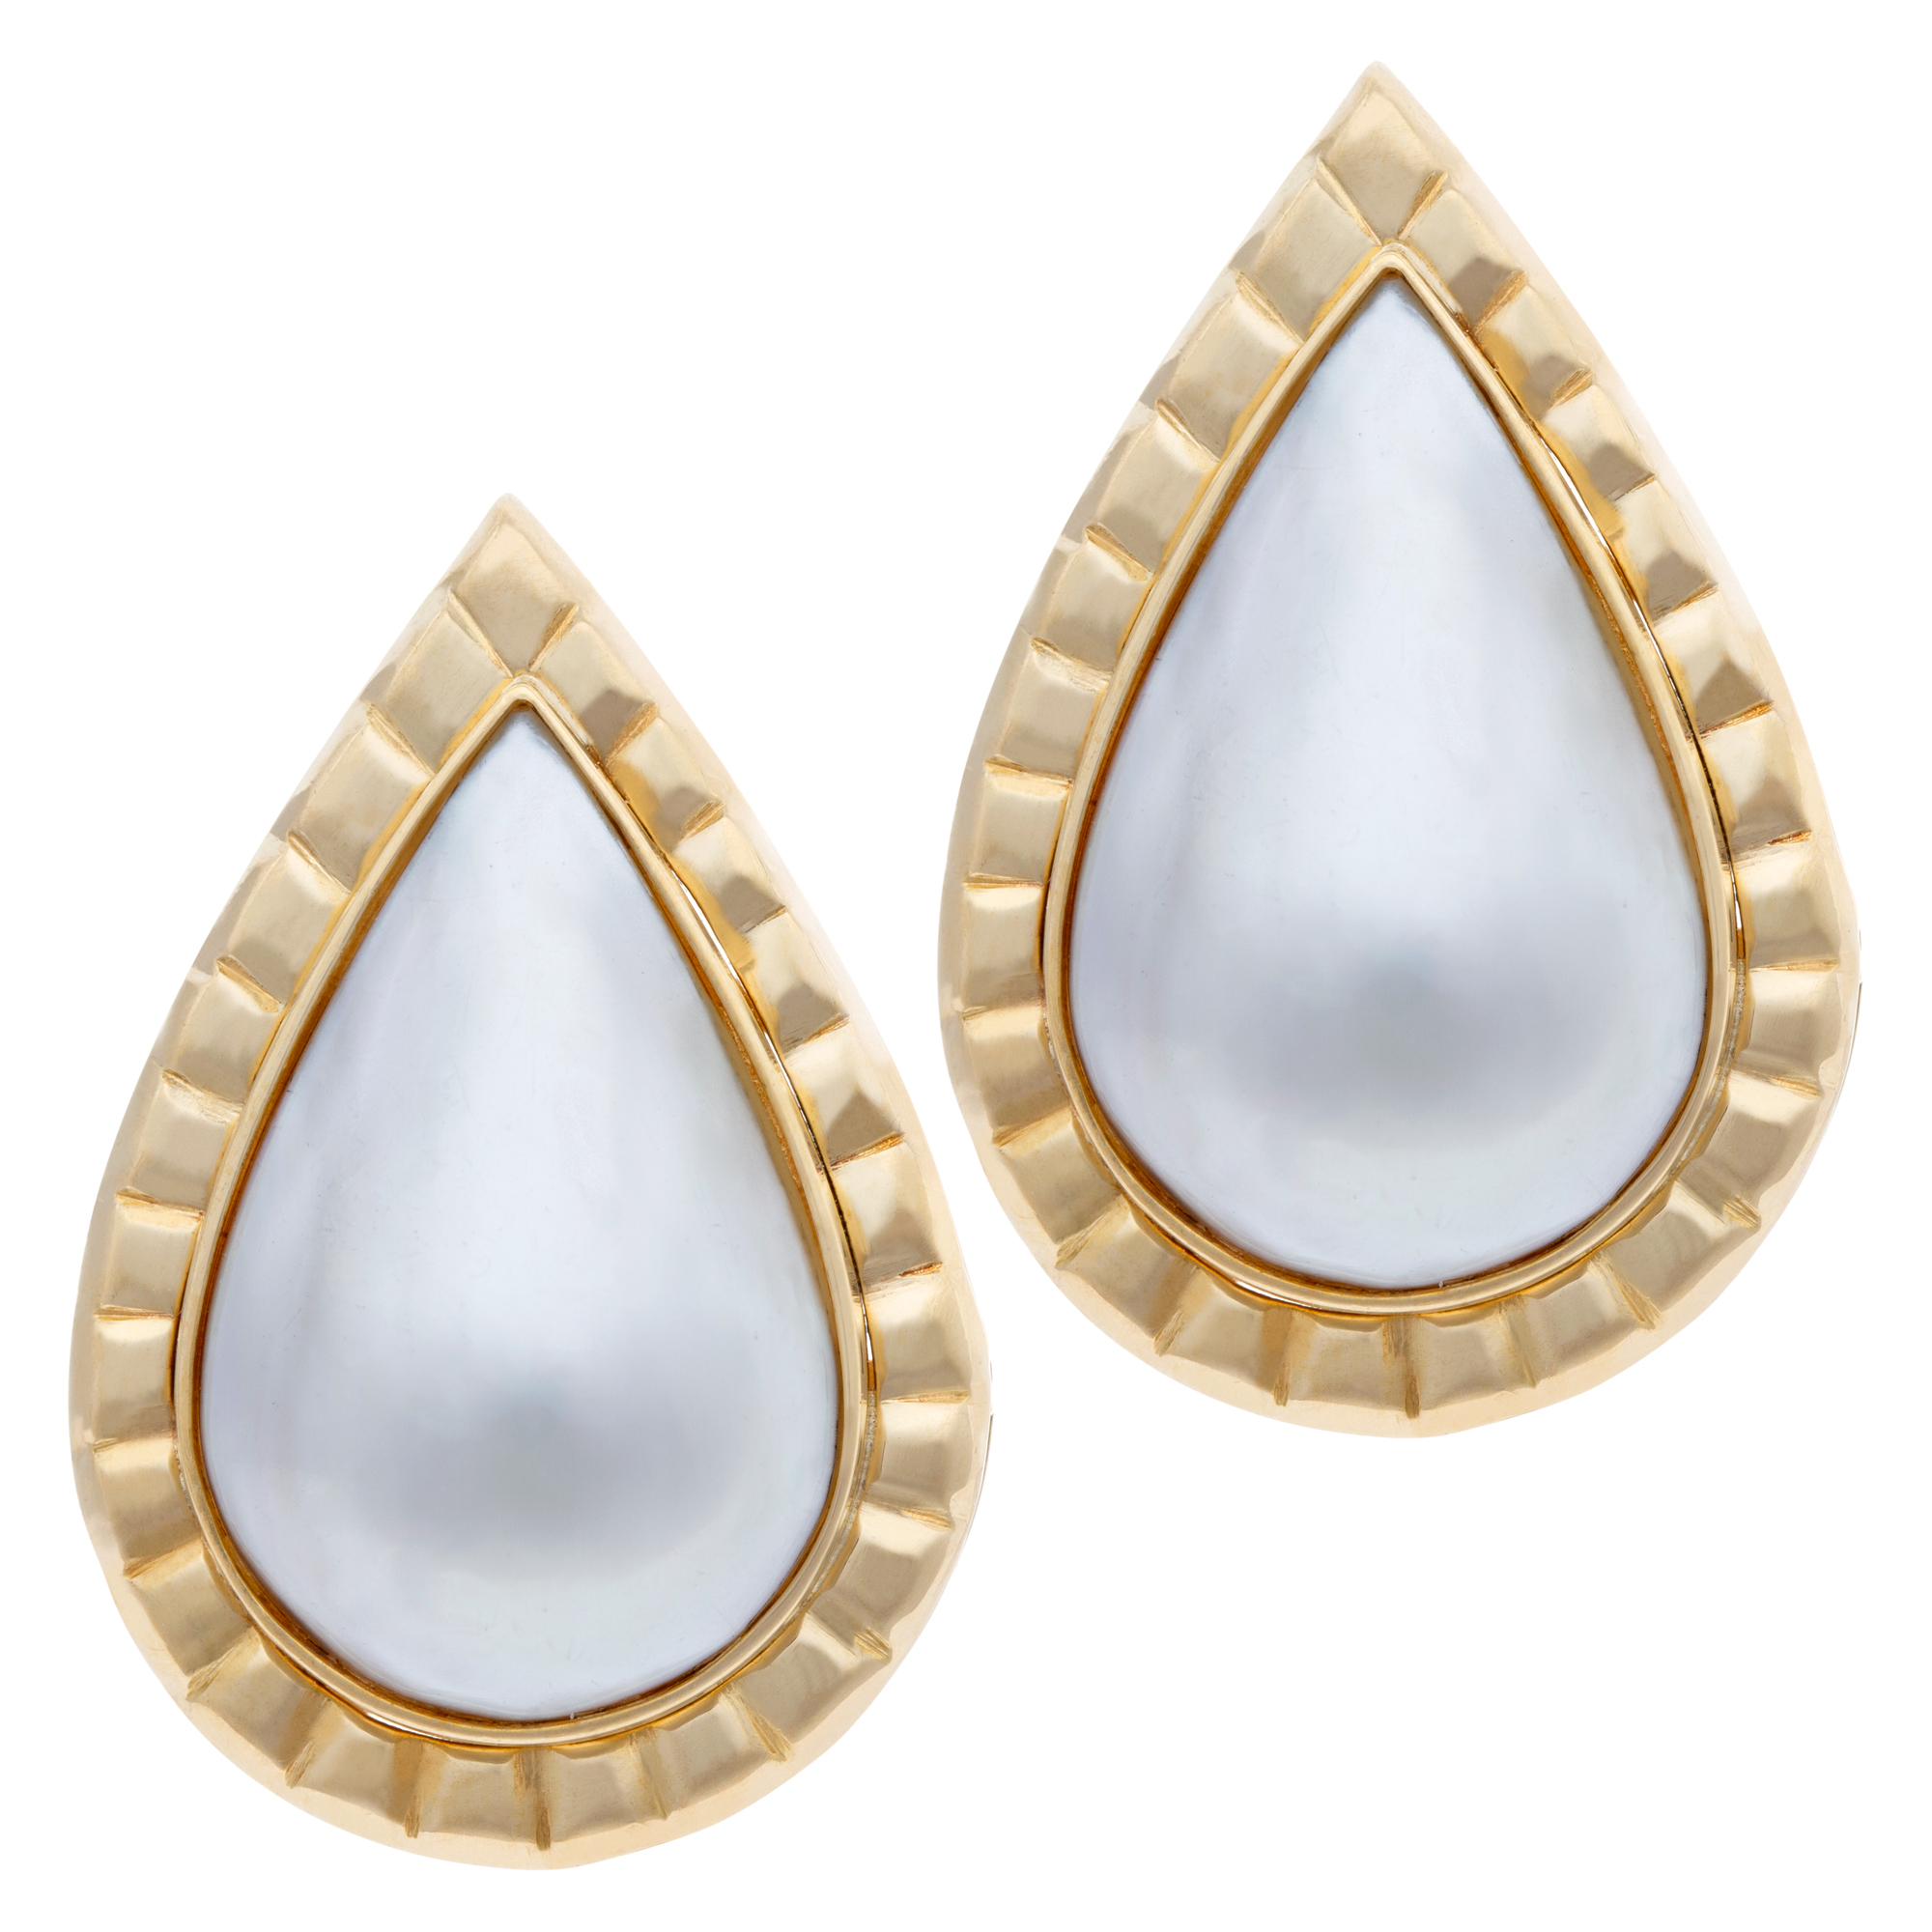 Pear shape Mobe pearl earrings set in ribbed 18K yellow gold. Post omega clip back.